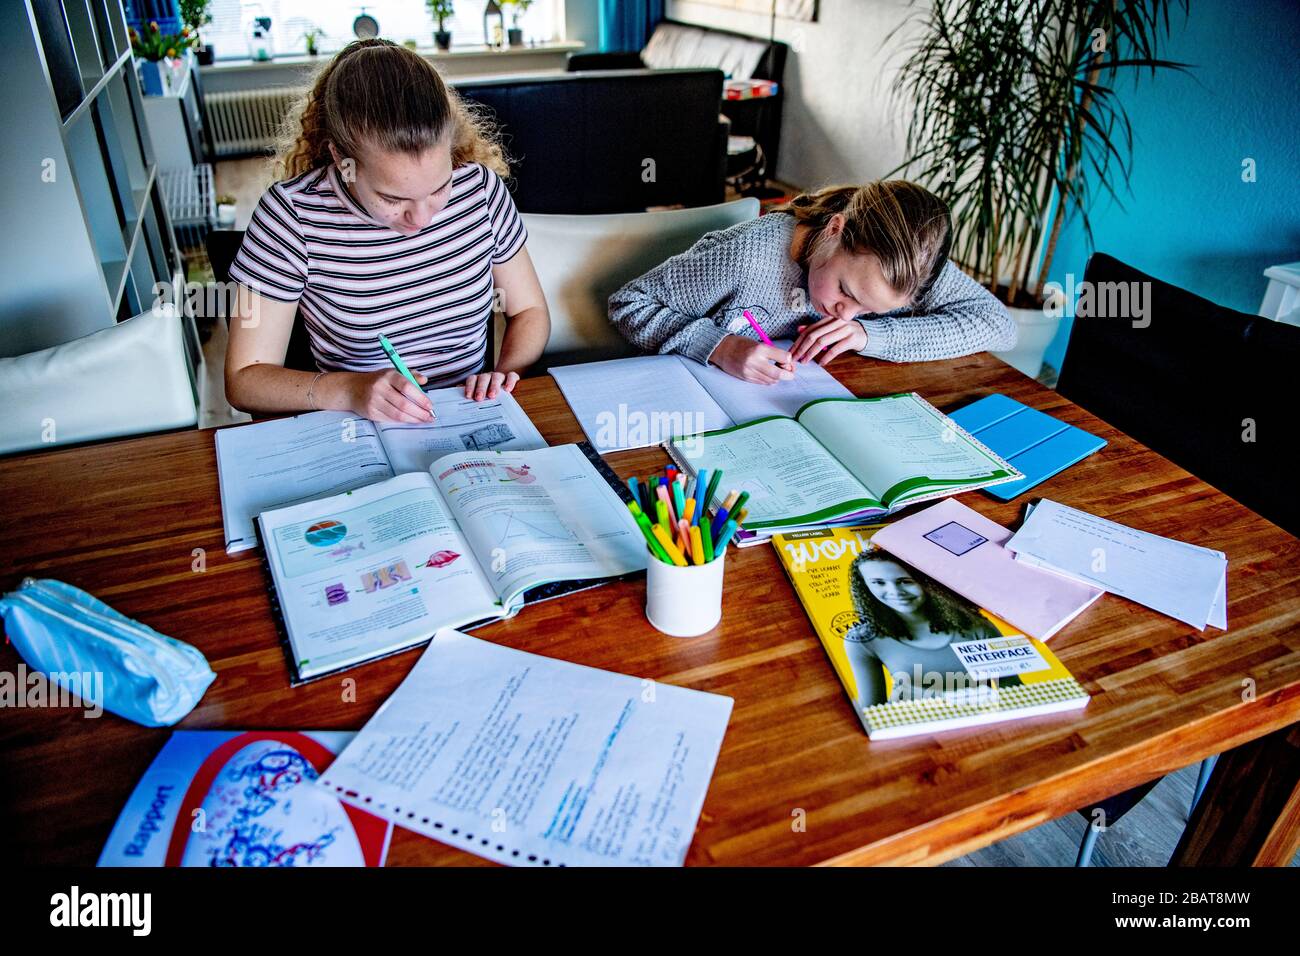 Two female students study and do homework at their home.The Dutch government has order all schools to be closed until further notice in attempt to control the spread of the COVID-19 Coronavirus. Students are to be home schooled with digital means such as laptops, digital tablets or mobile phones. Stock Photo